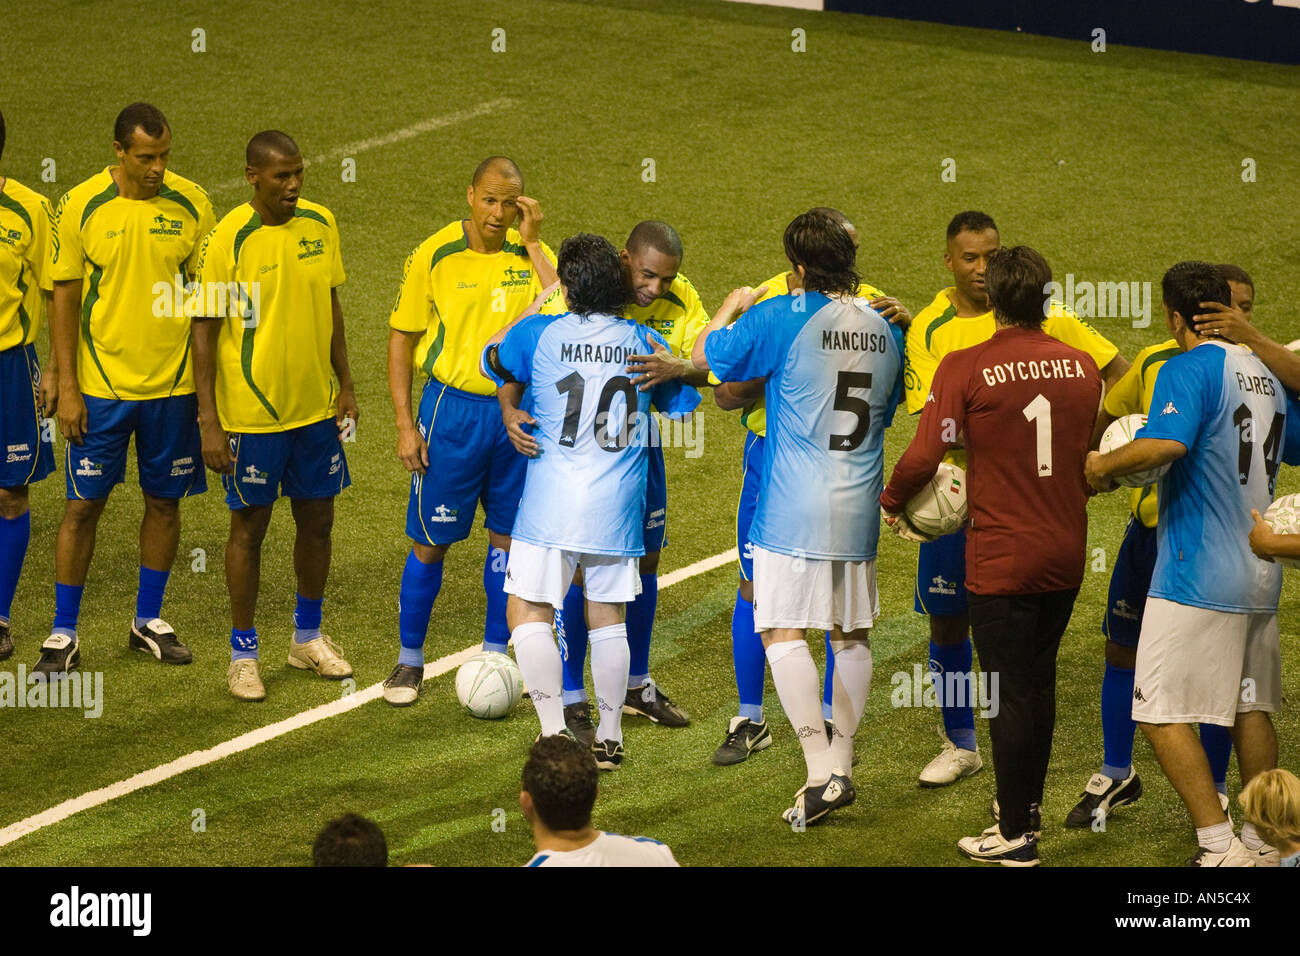 Argentina and Brazil showbol football soccer teams in a match played in the Luna Park stadium. Maradona at the begining. Stock Photo